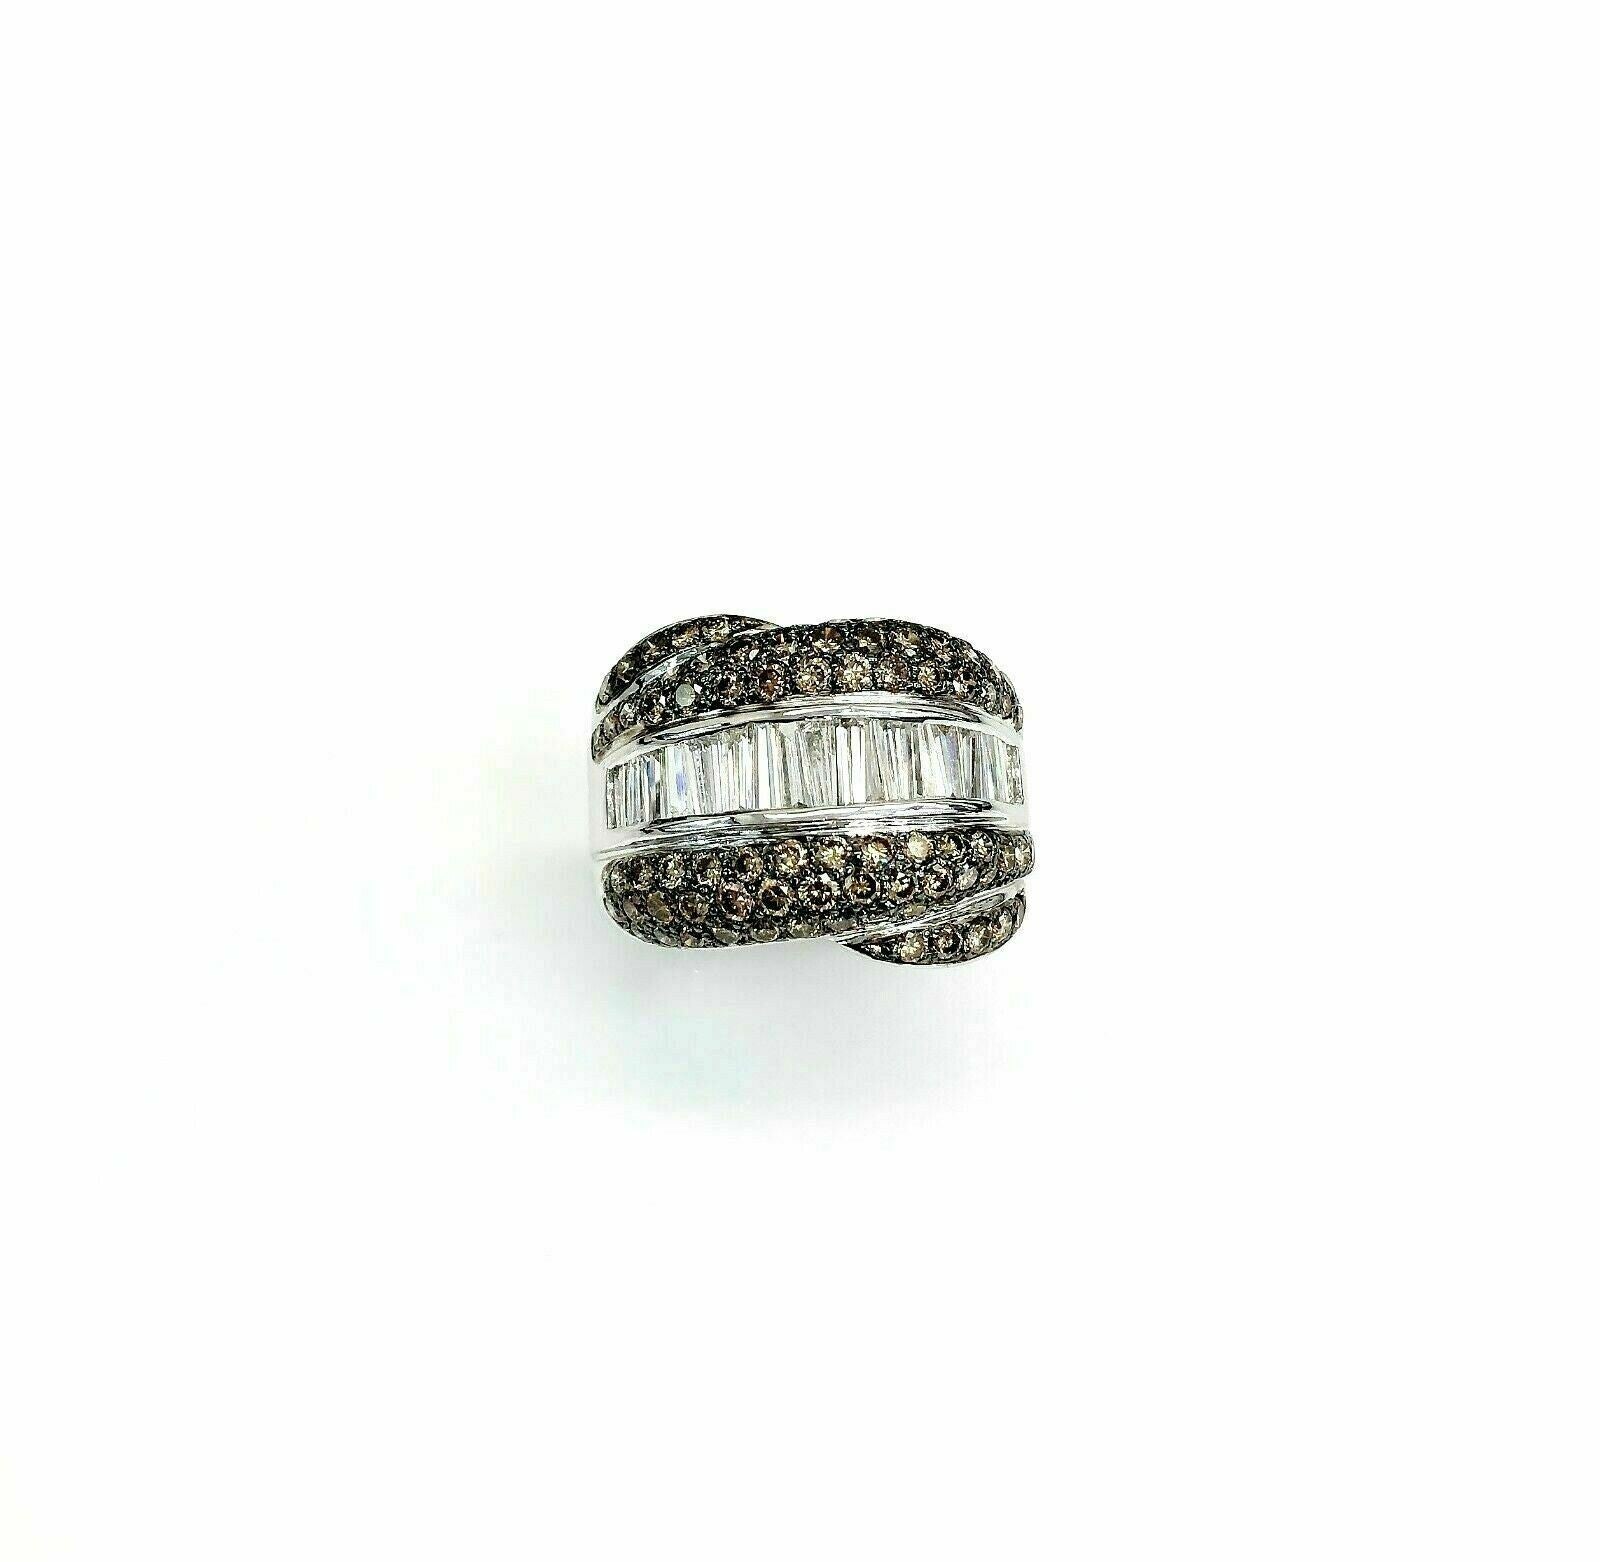 3.25 Carats Natural Round White and Fancy Brown Diamond Ring 18K Whiet Gold